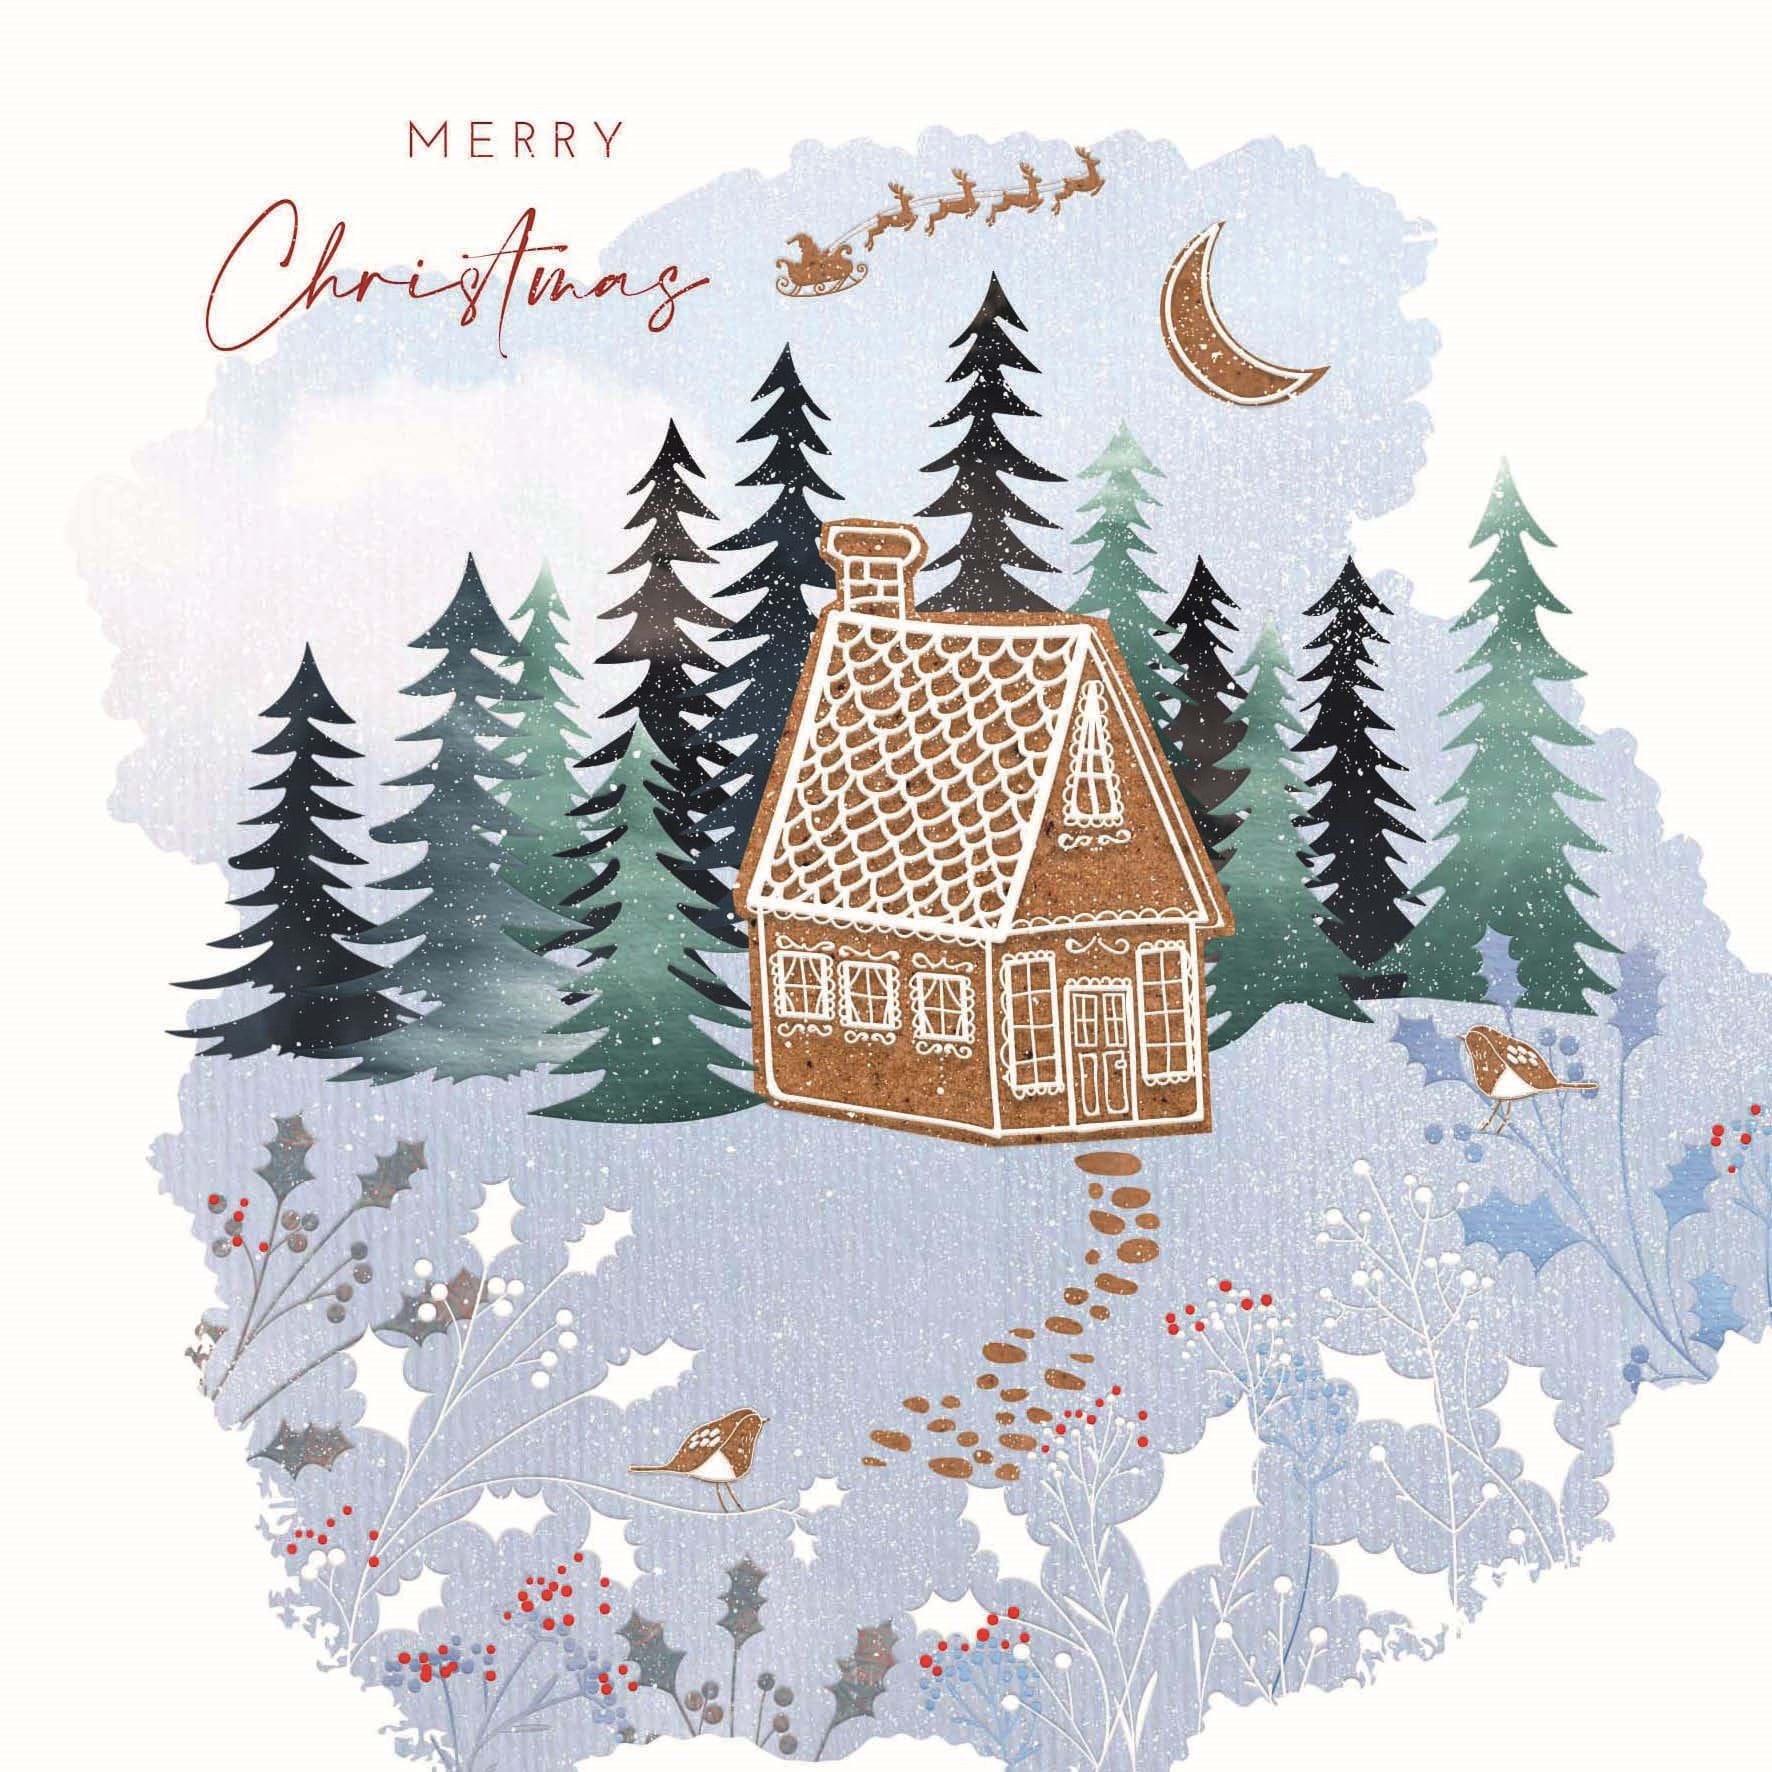 Gingerbread Cottage, Cancer Research Christmas Cards - Pack of 10